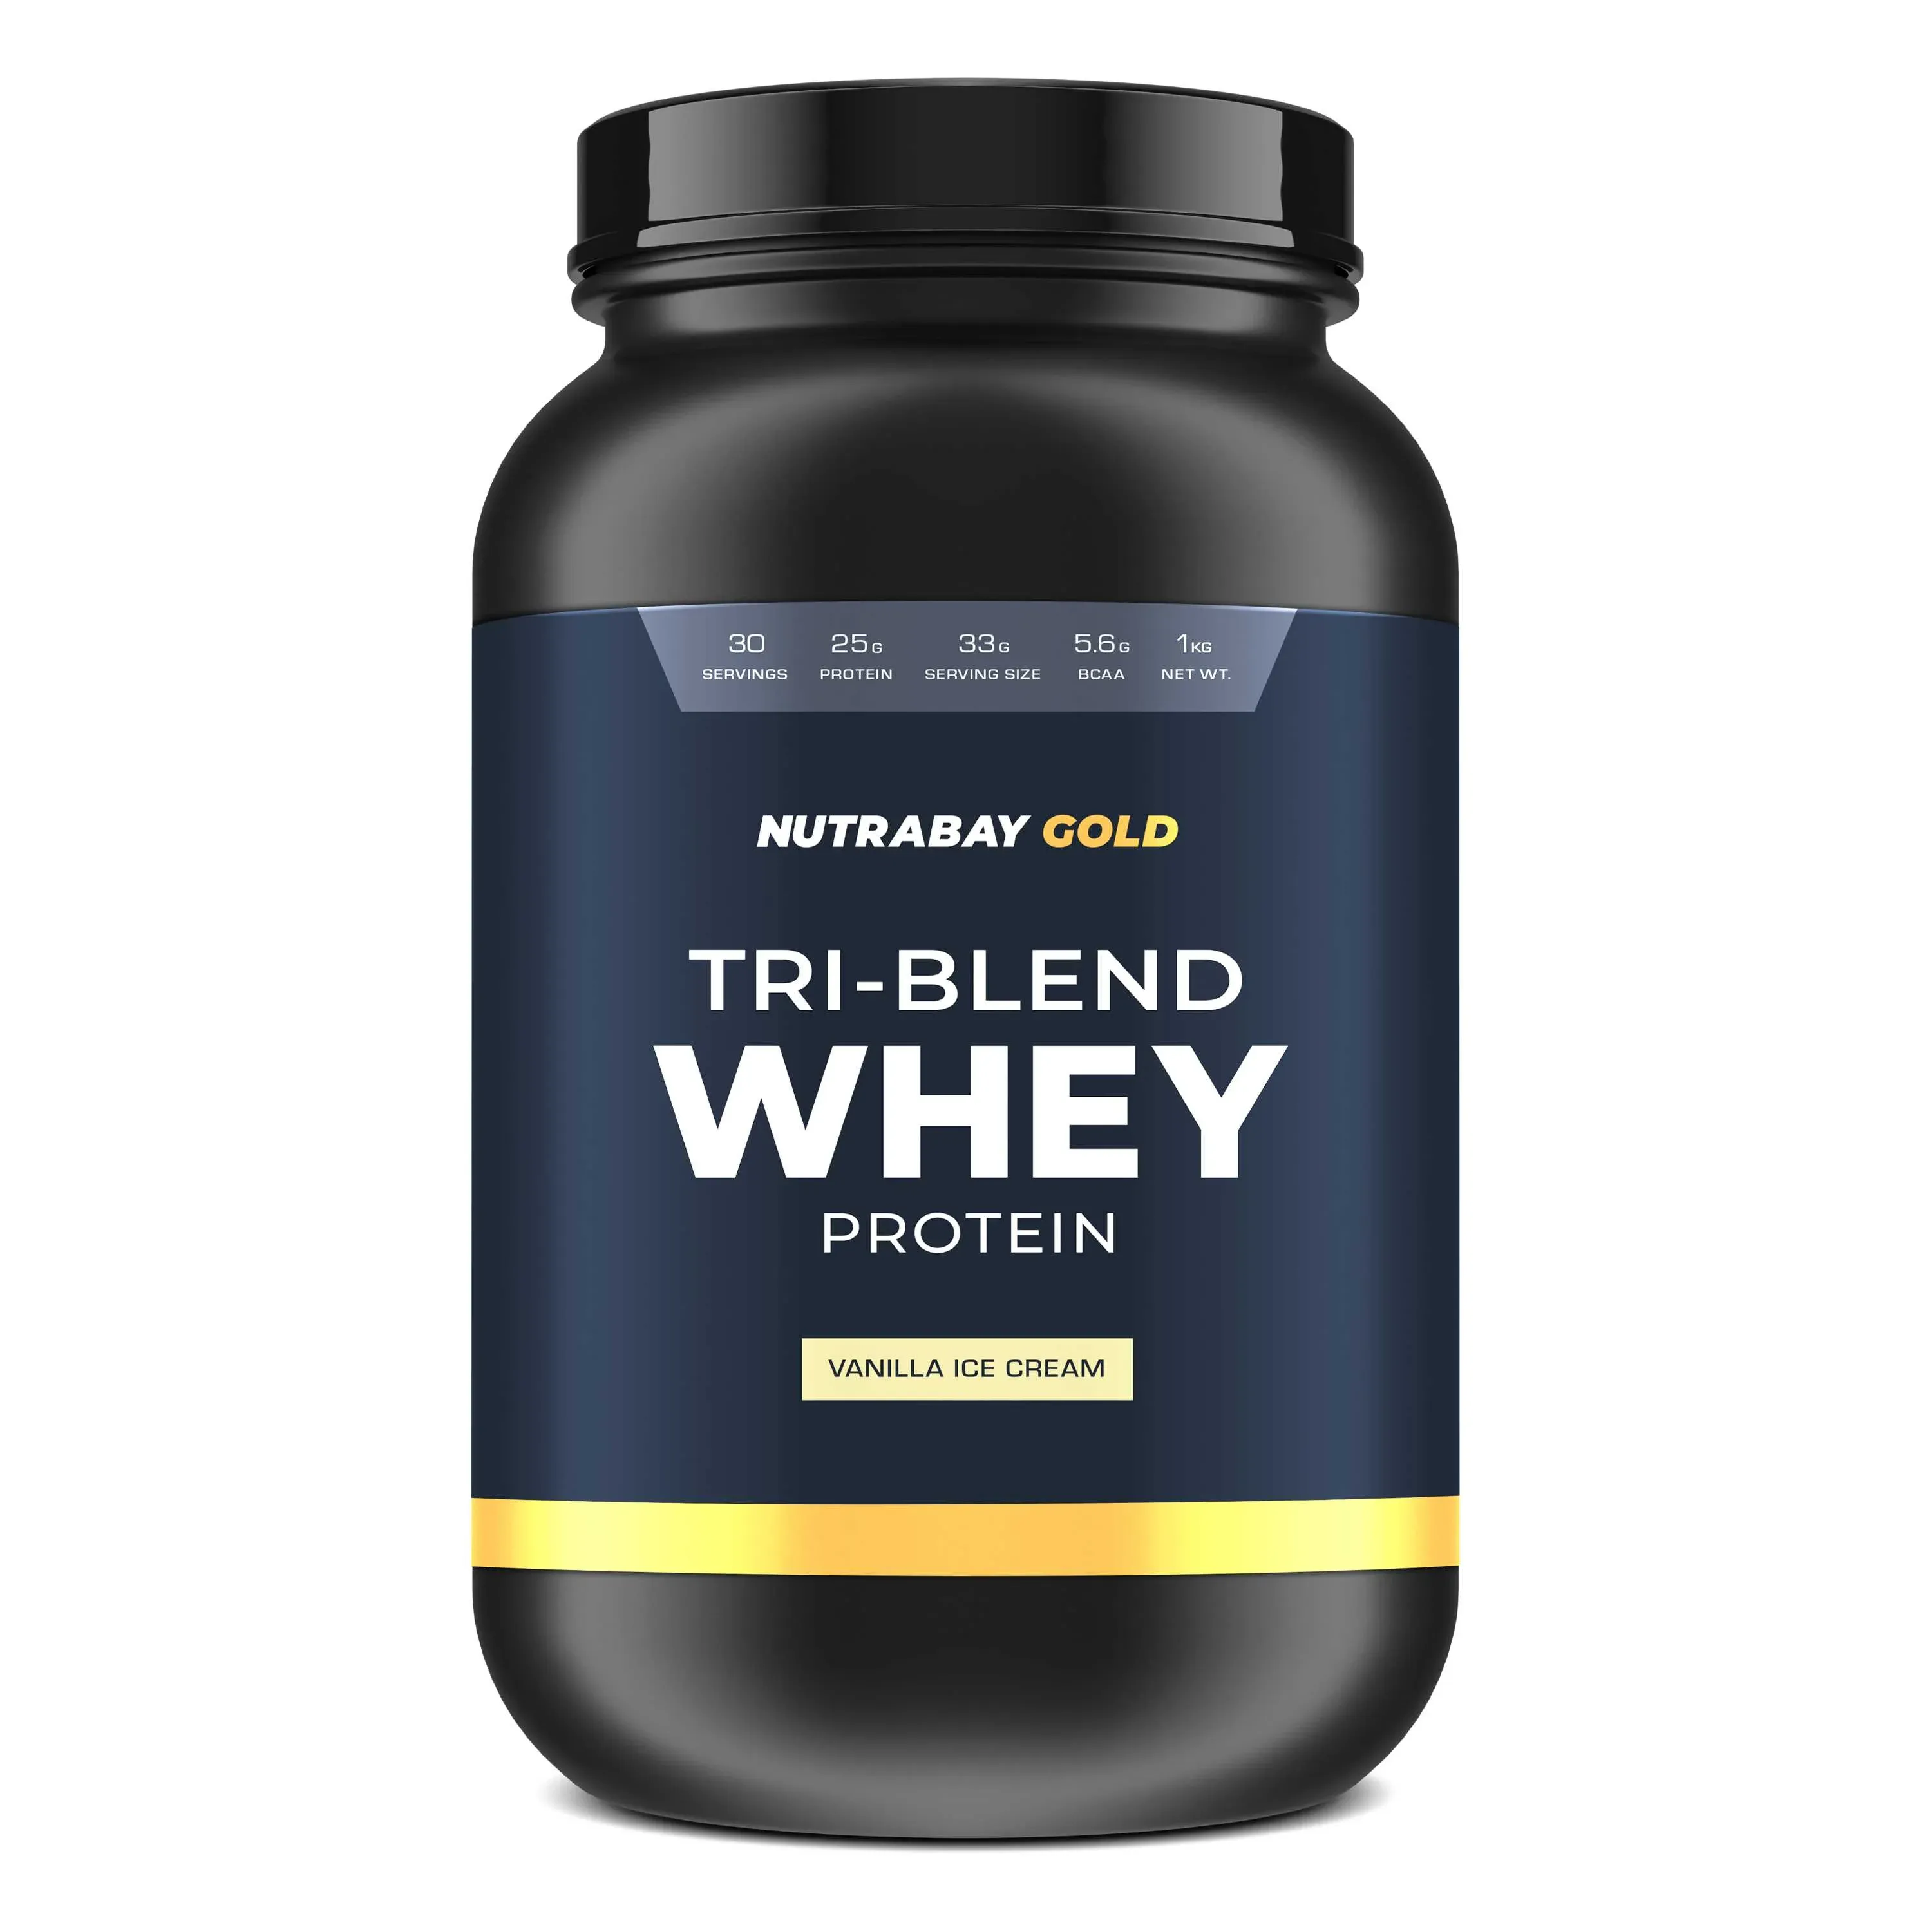 Nutrabay Gold Tri-Blend Whey Protein Image